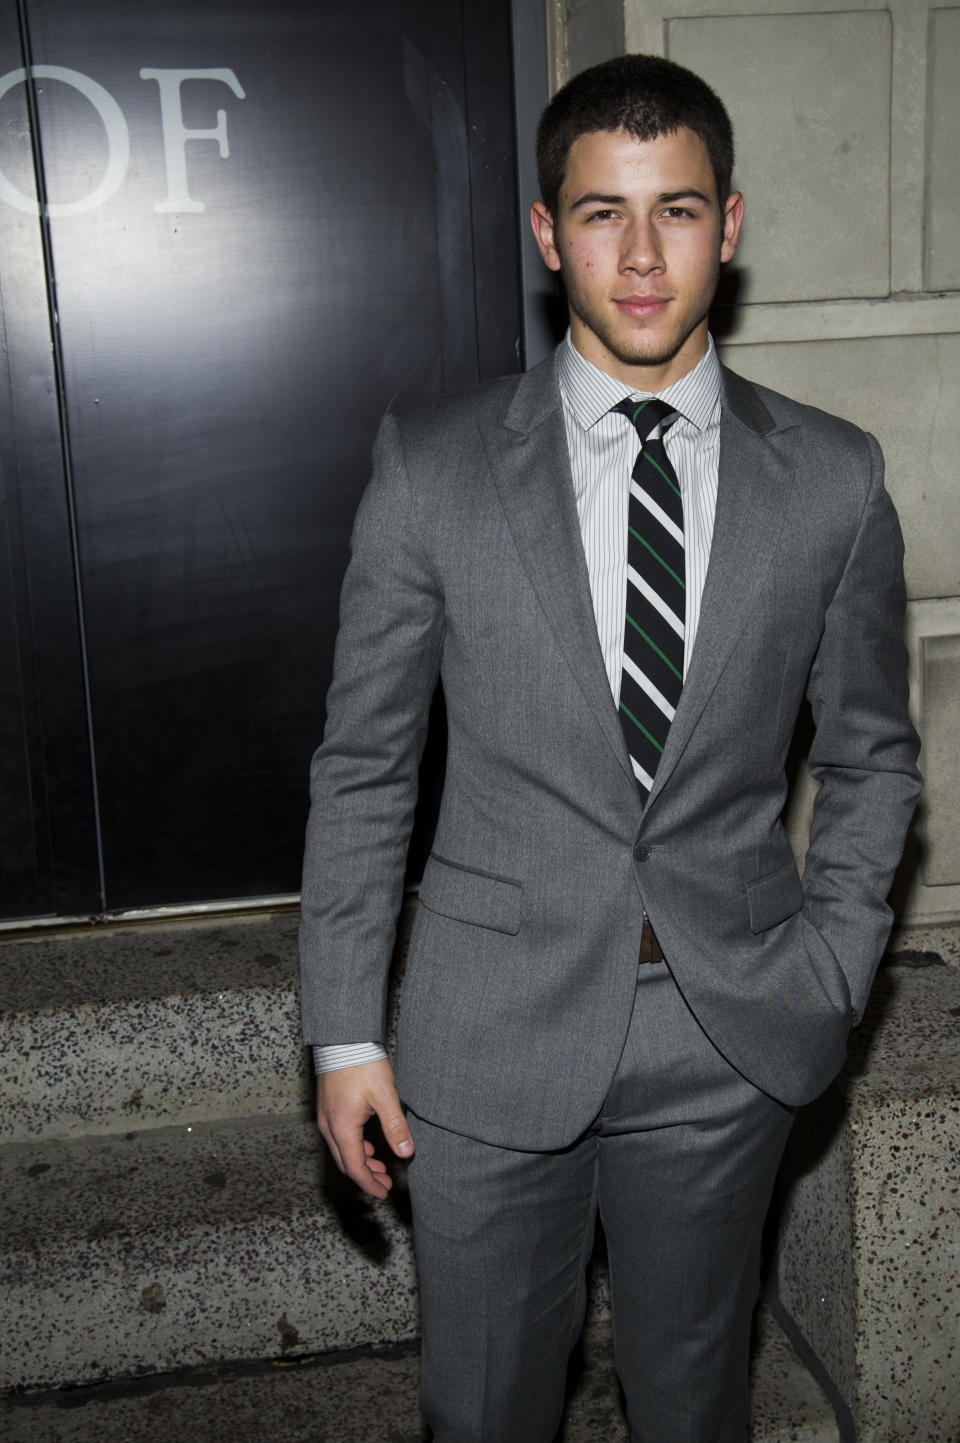 Nick Jonas attends the opening night performance of the Broadway play "Cat on a Hot Tin Roof" on Thursday, Jan. 17, 2013 in New York. (Photo by Charles Sykes/Invision/AP)